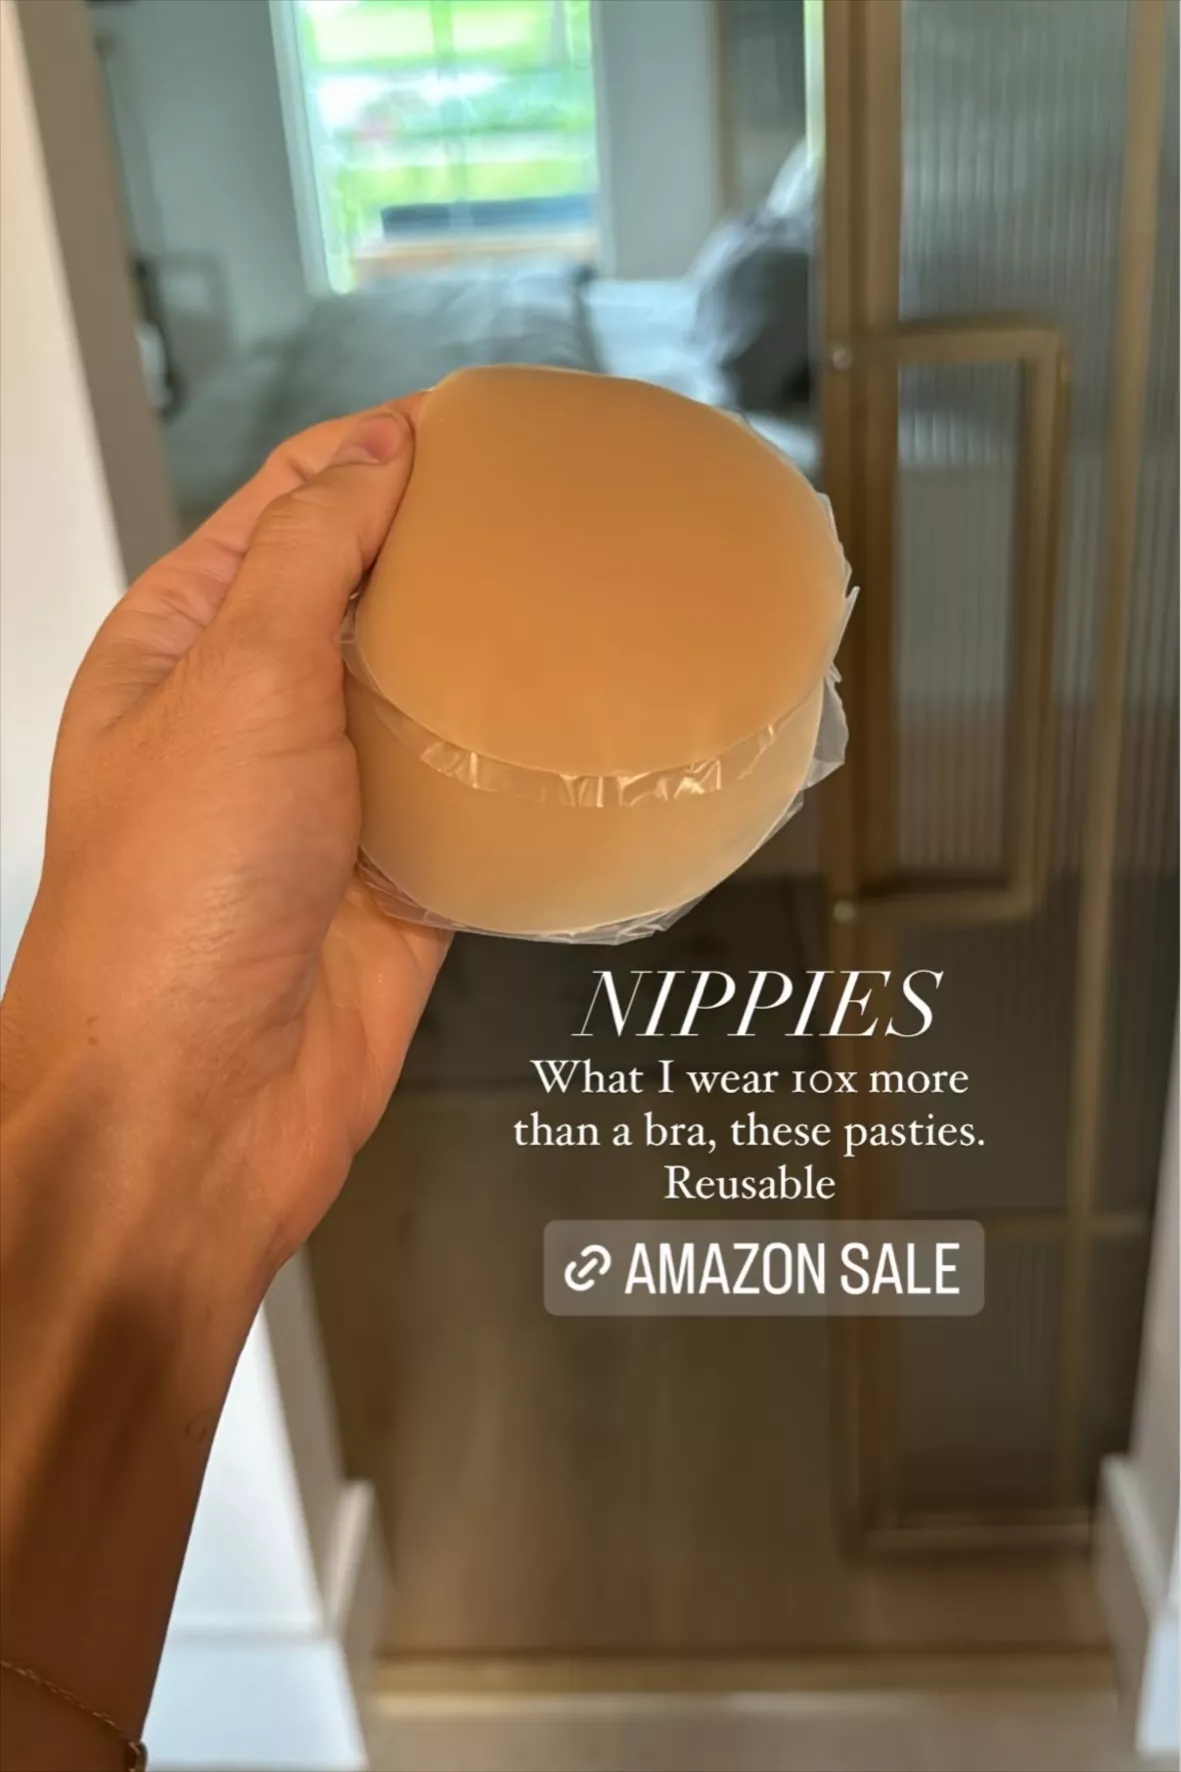 Nippies Nipple Cover - Sticky … curated on LTK